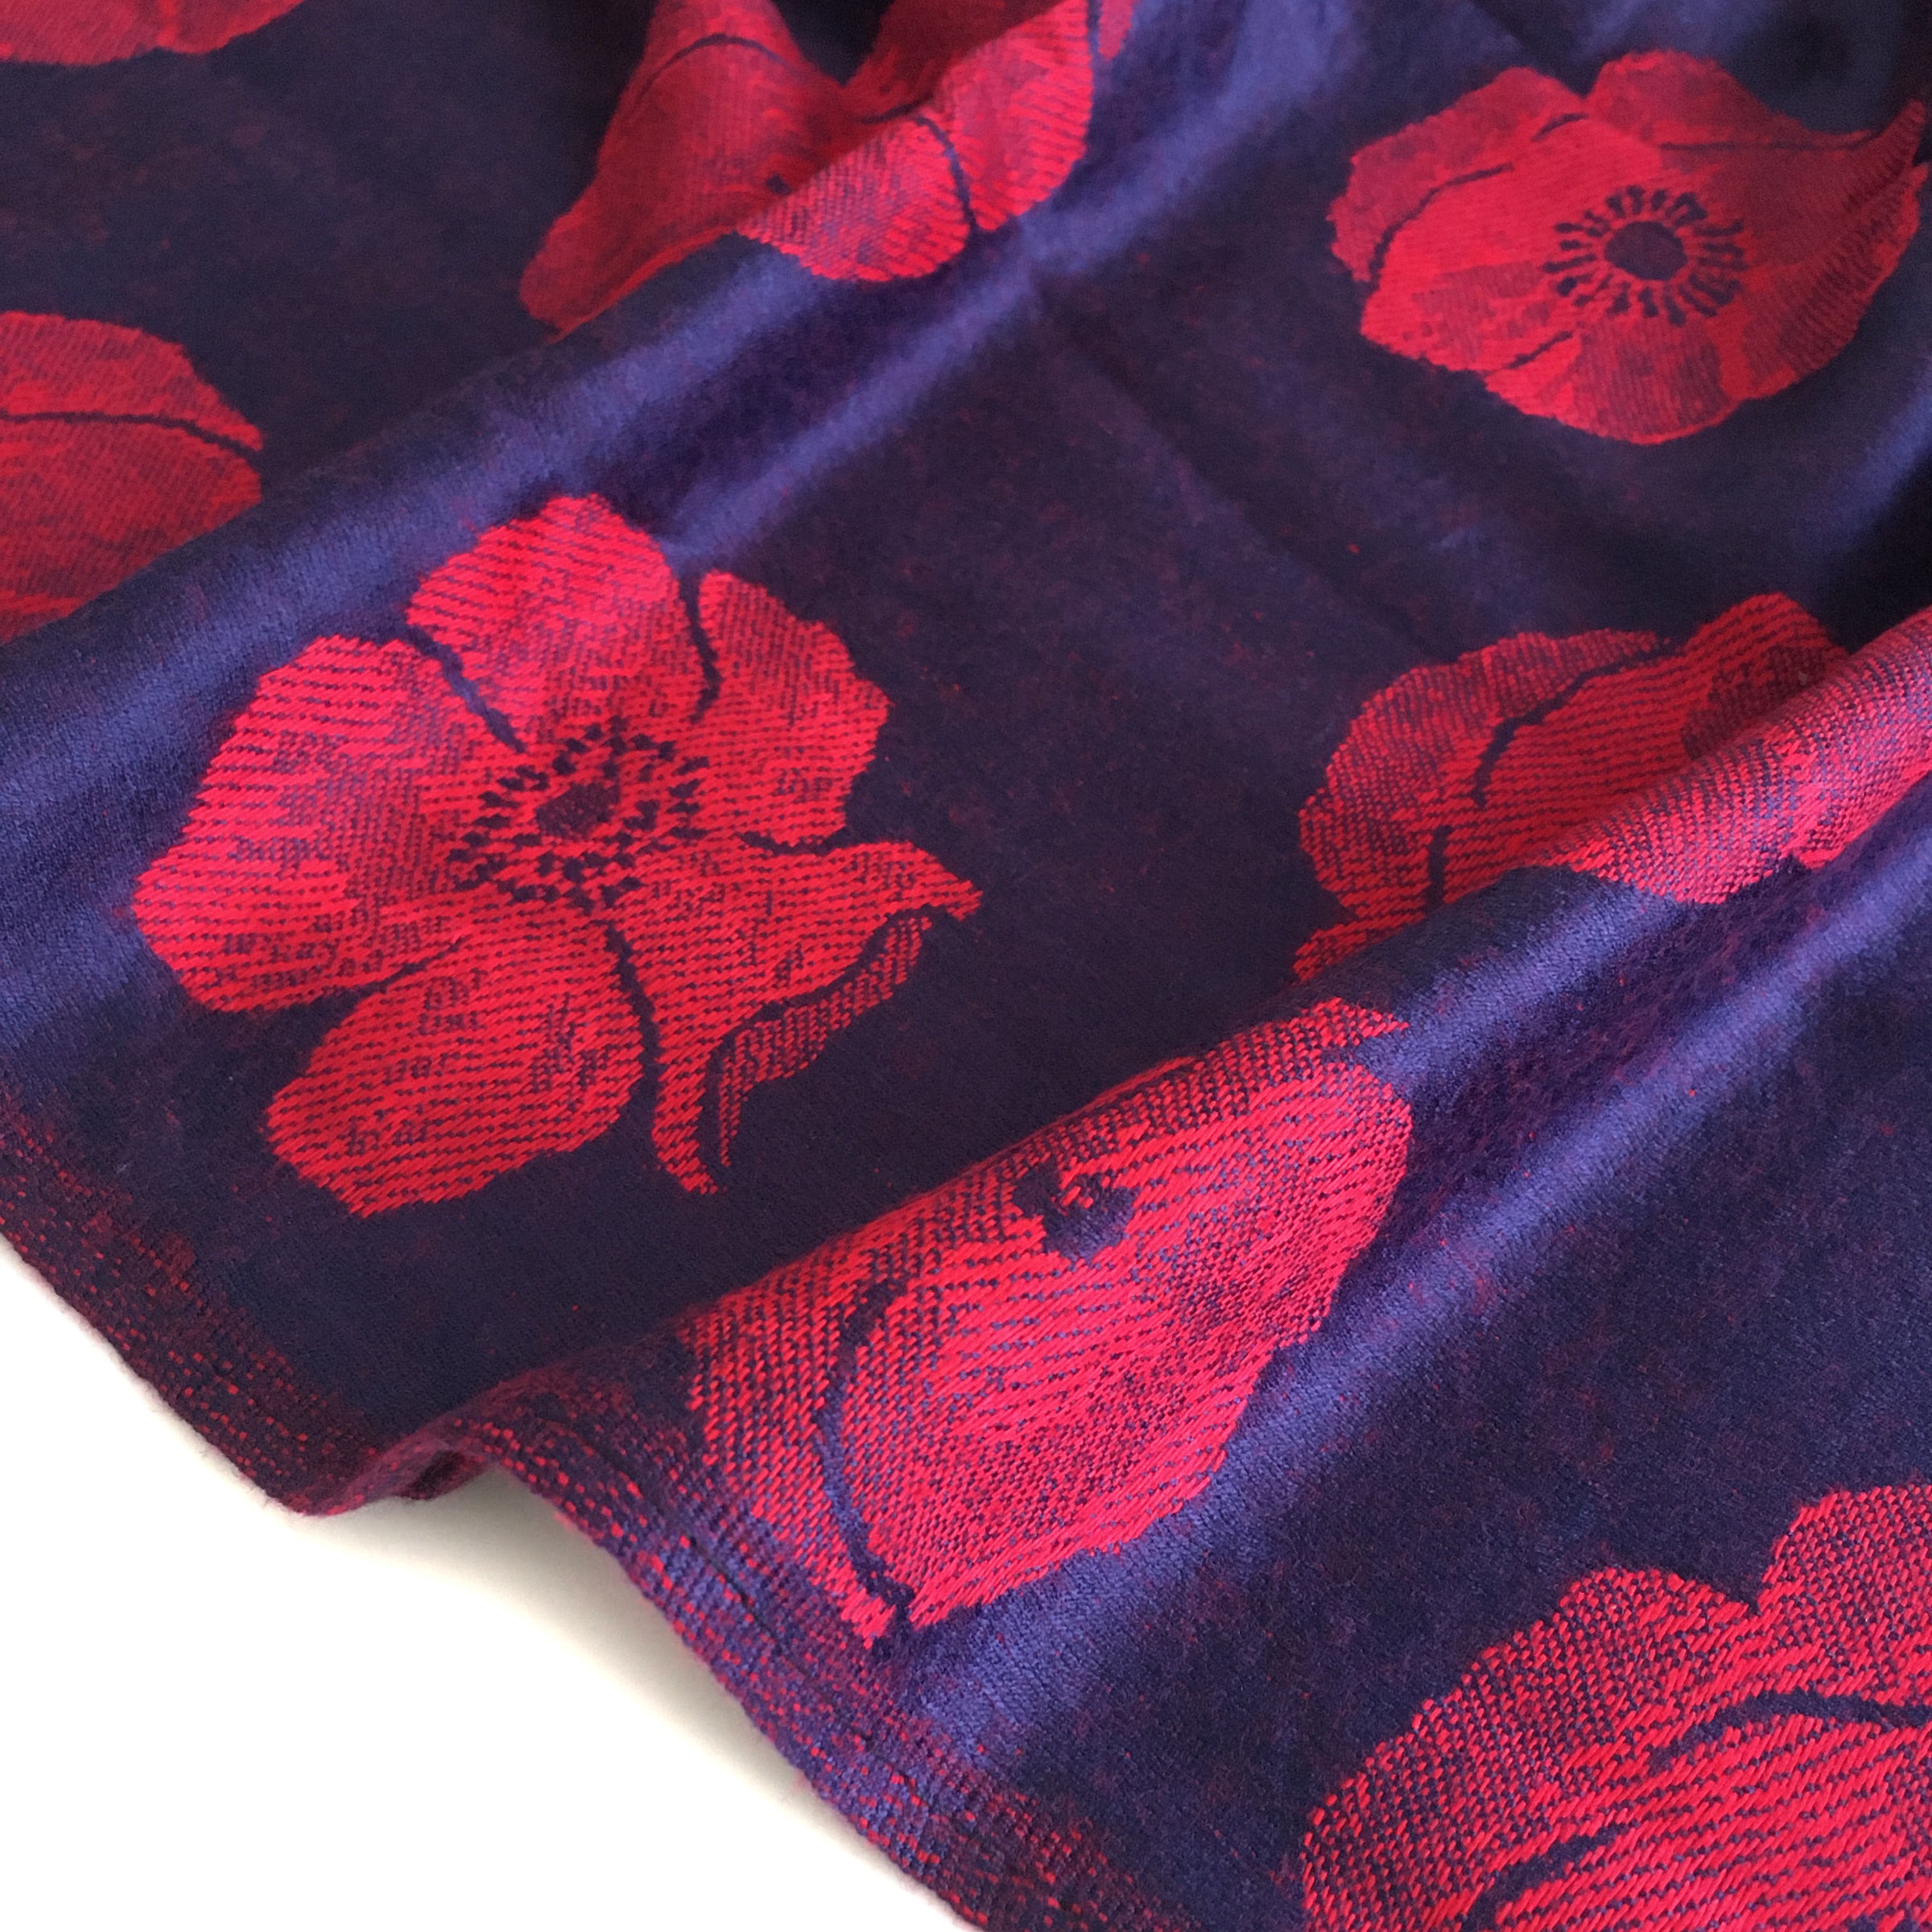 LARGE REVERSIBLE NAVY BLUE AND RED POPPY PASHMINA SHAWL SCARF